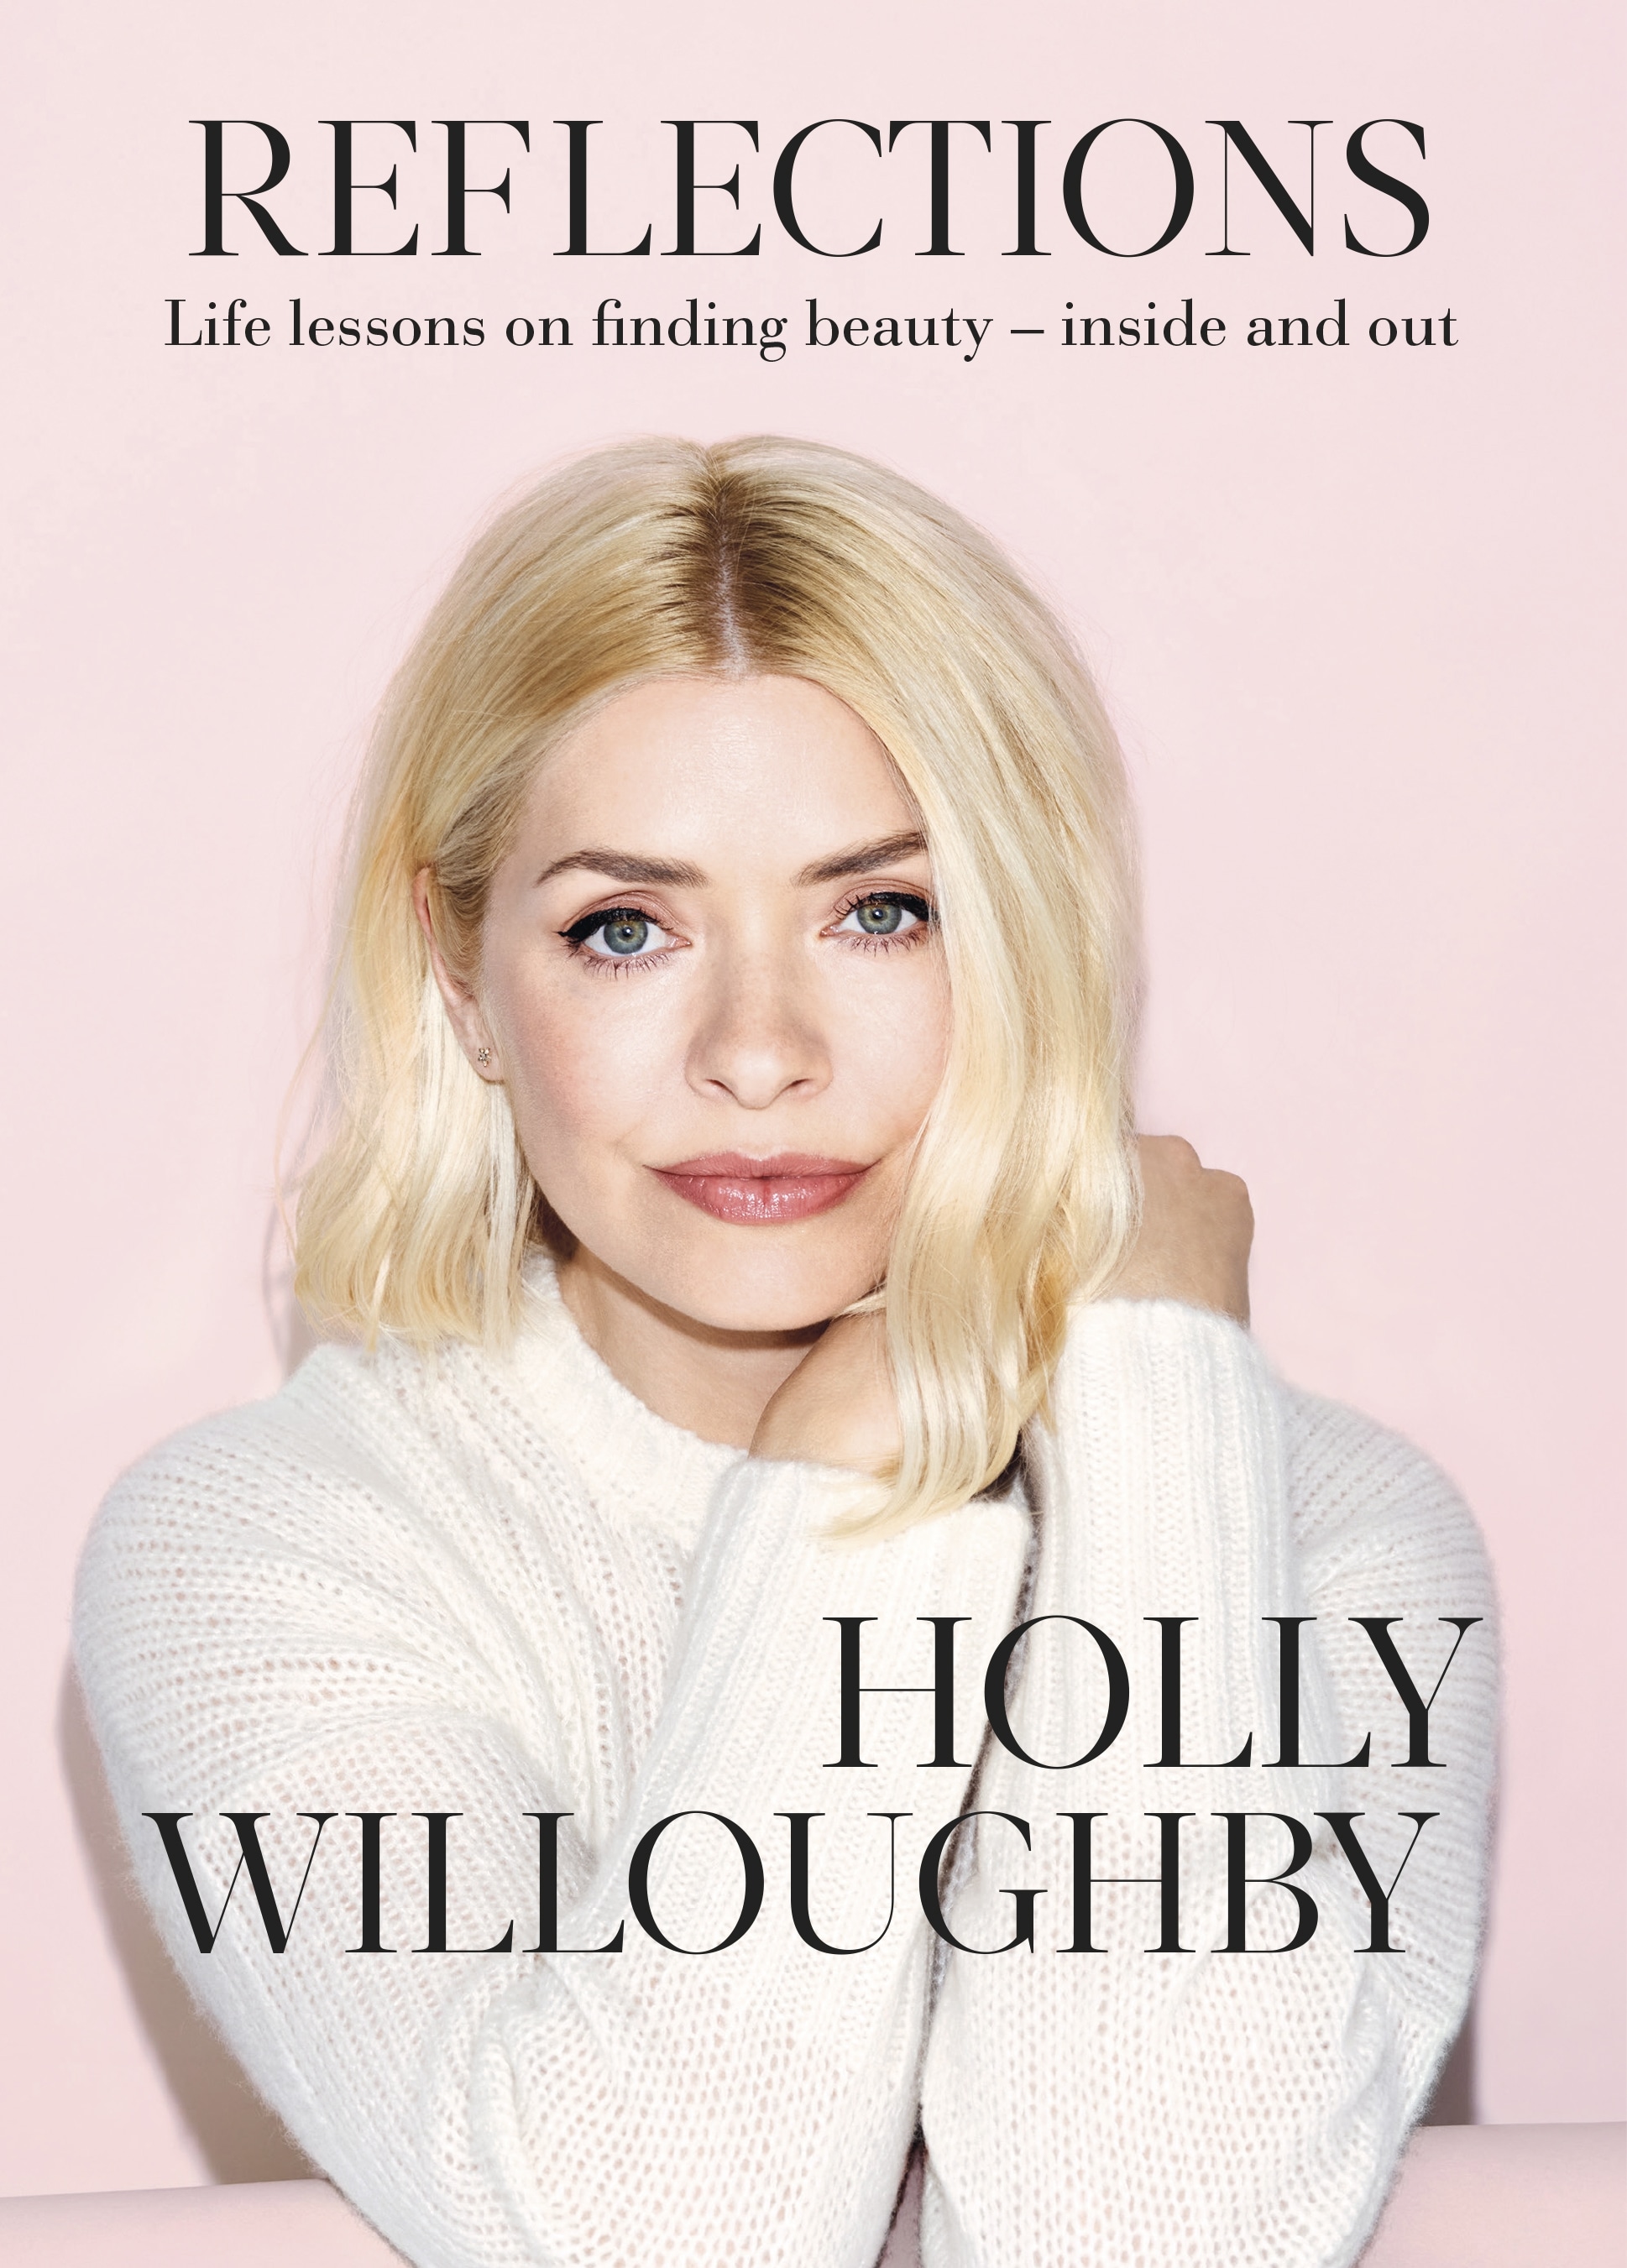 Book “Reflections” by Holly Willoughby — October 28, 2021